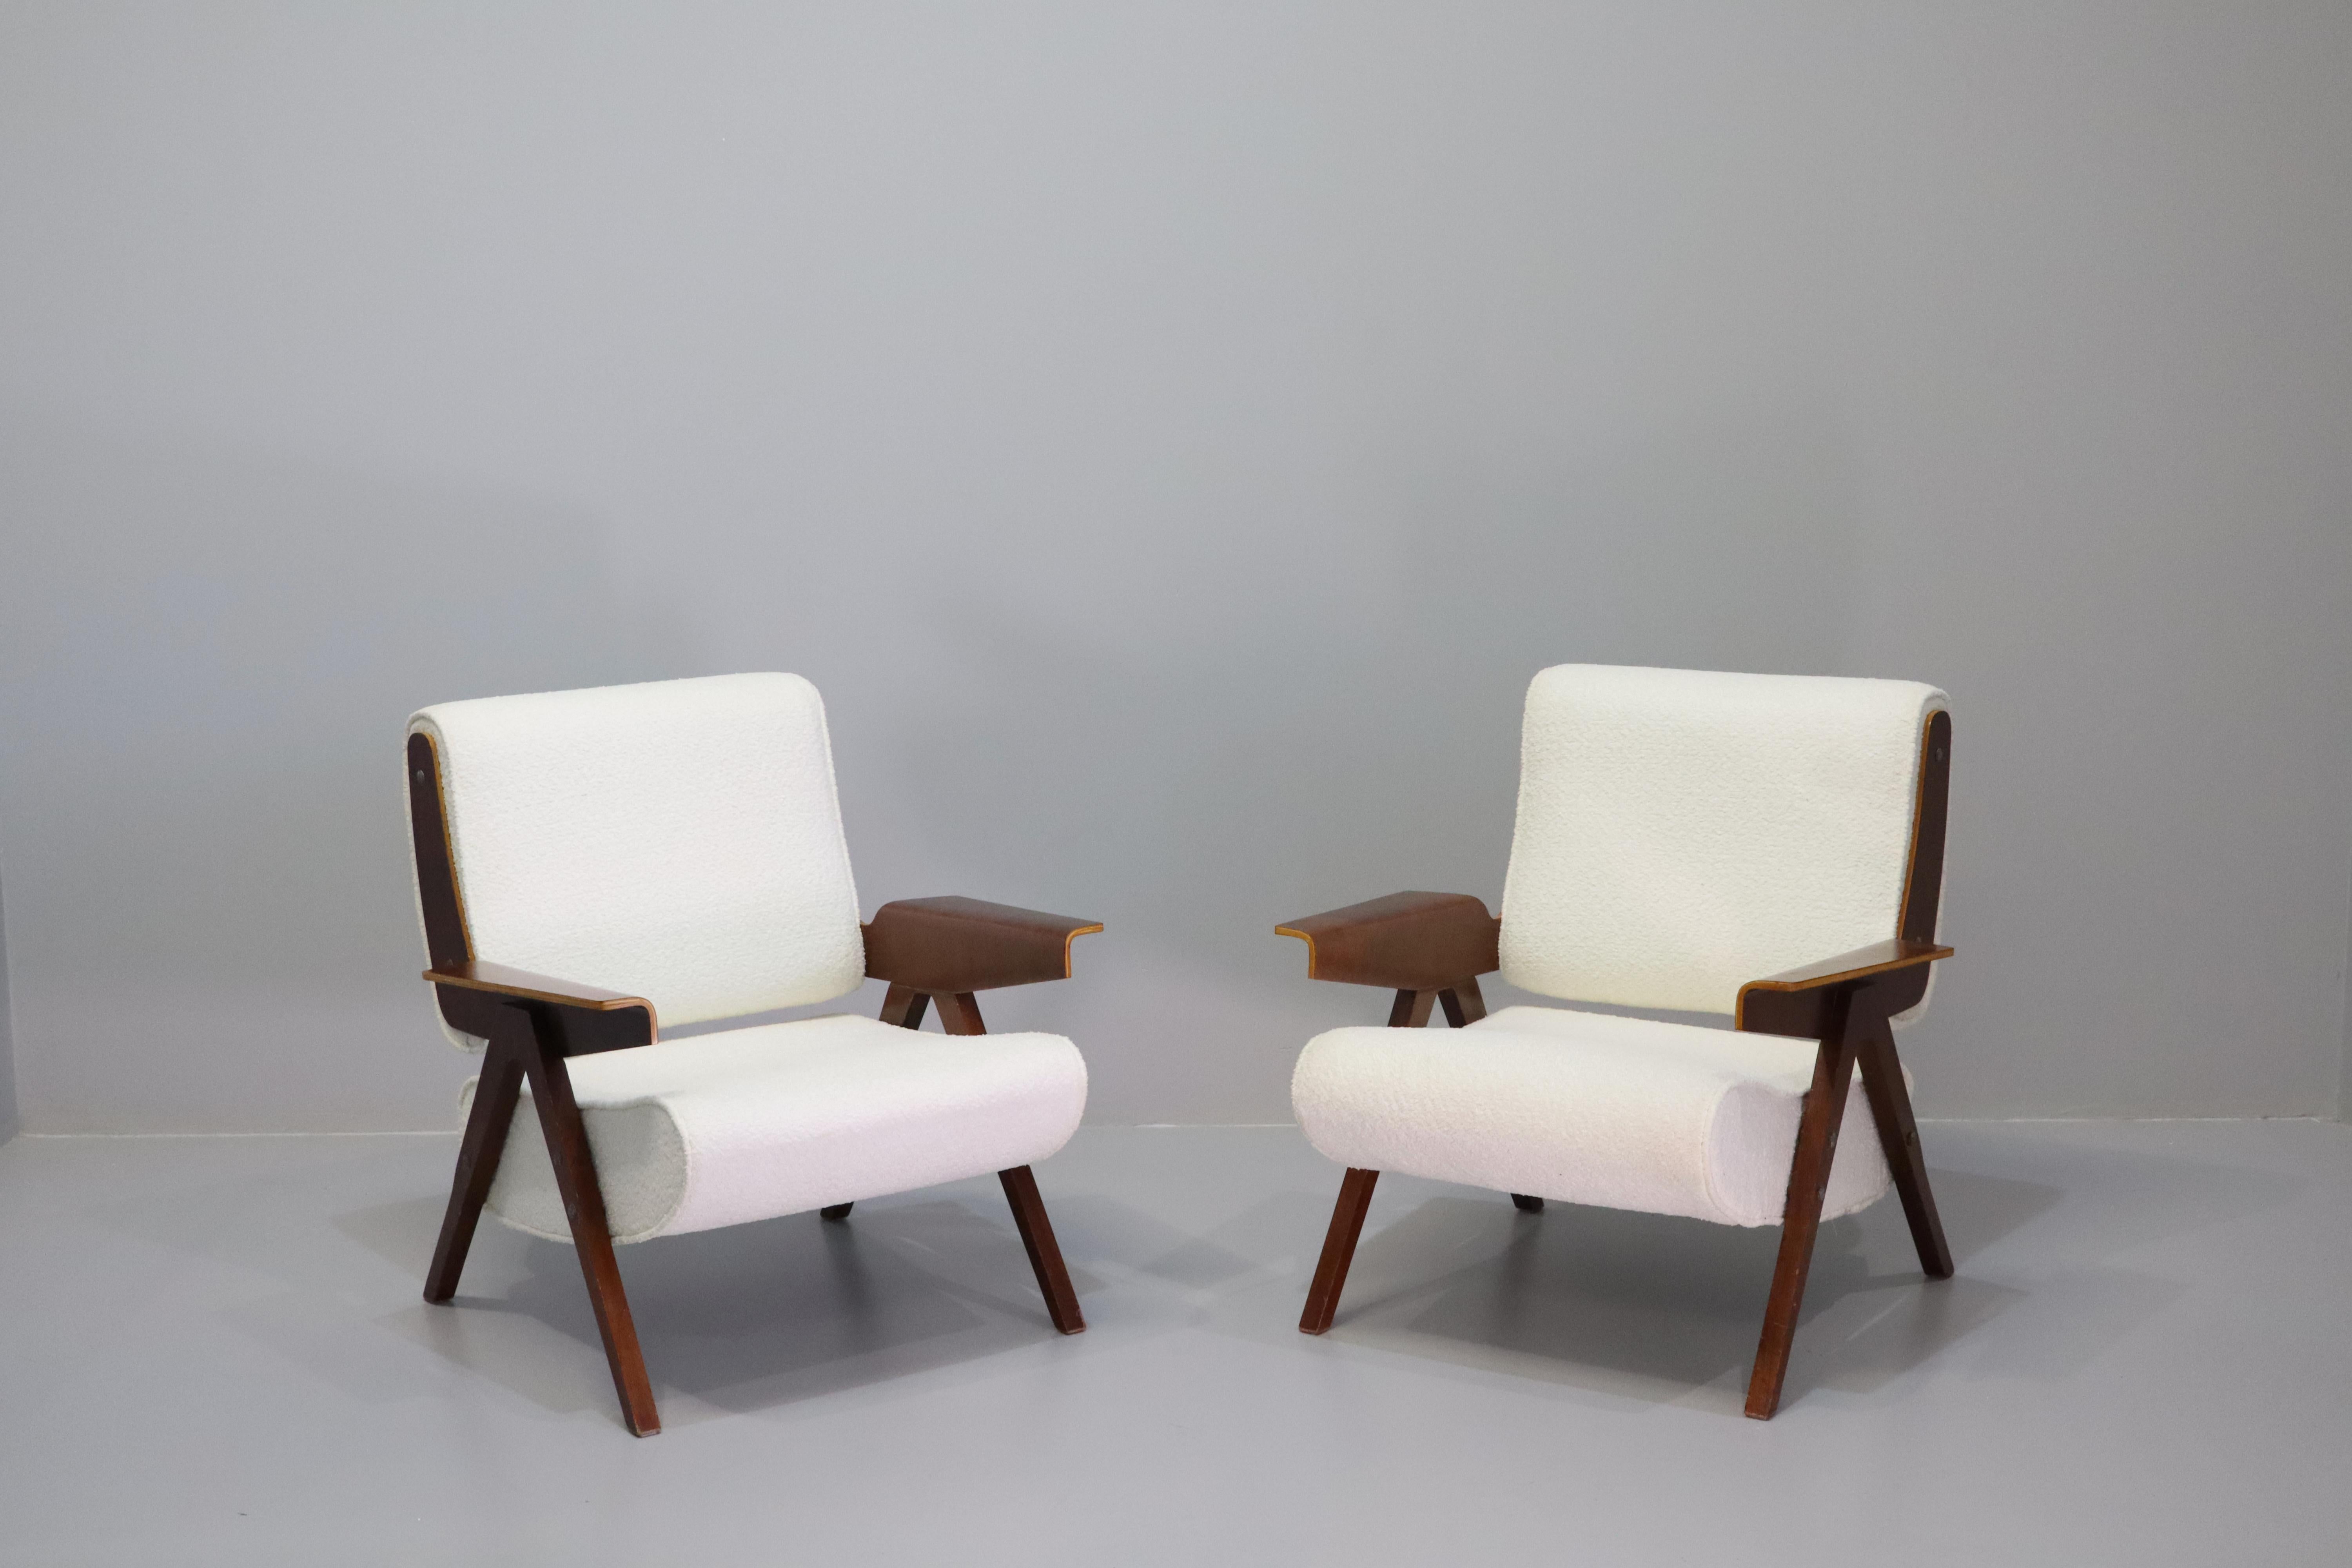 Italian Pair Of Gianfranco Frattini Model 831 Lounge Chairs For Cassina, 1950s For Sale